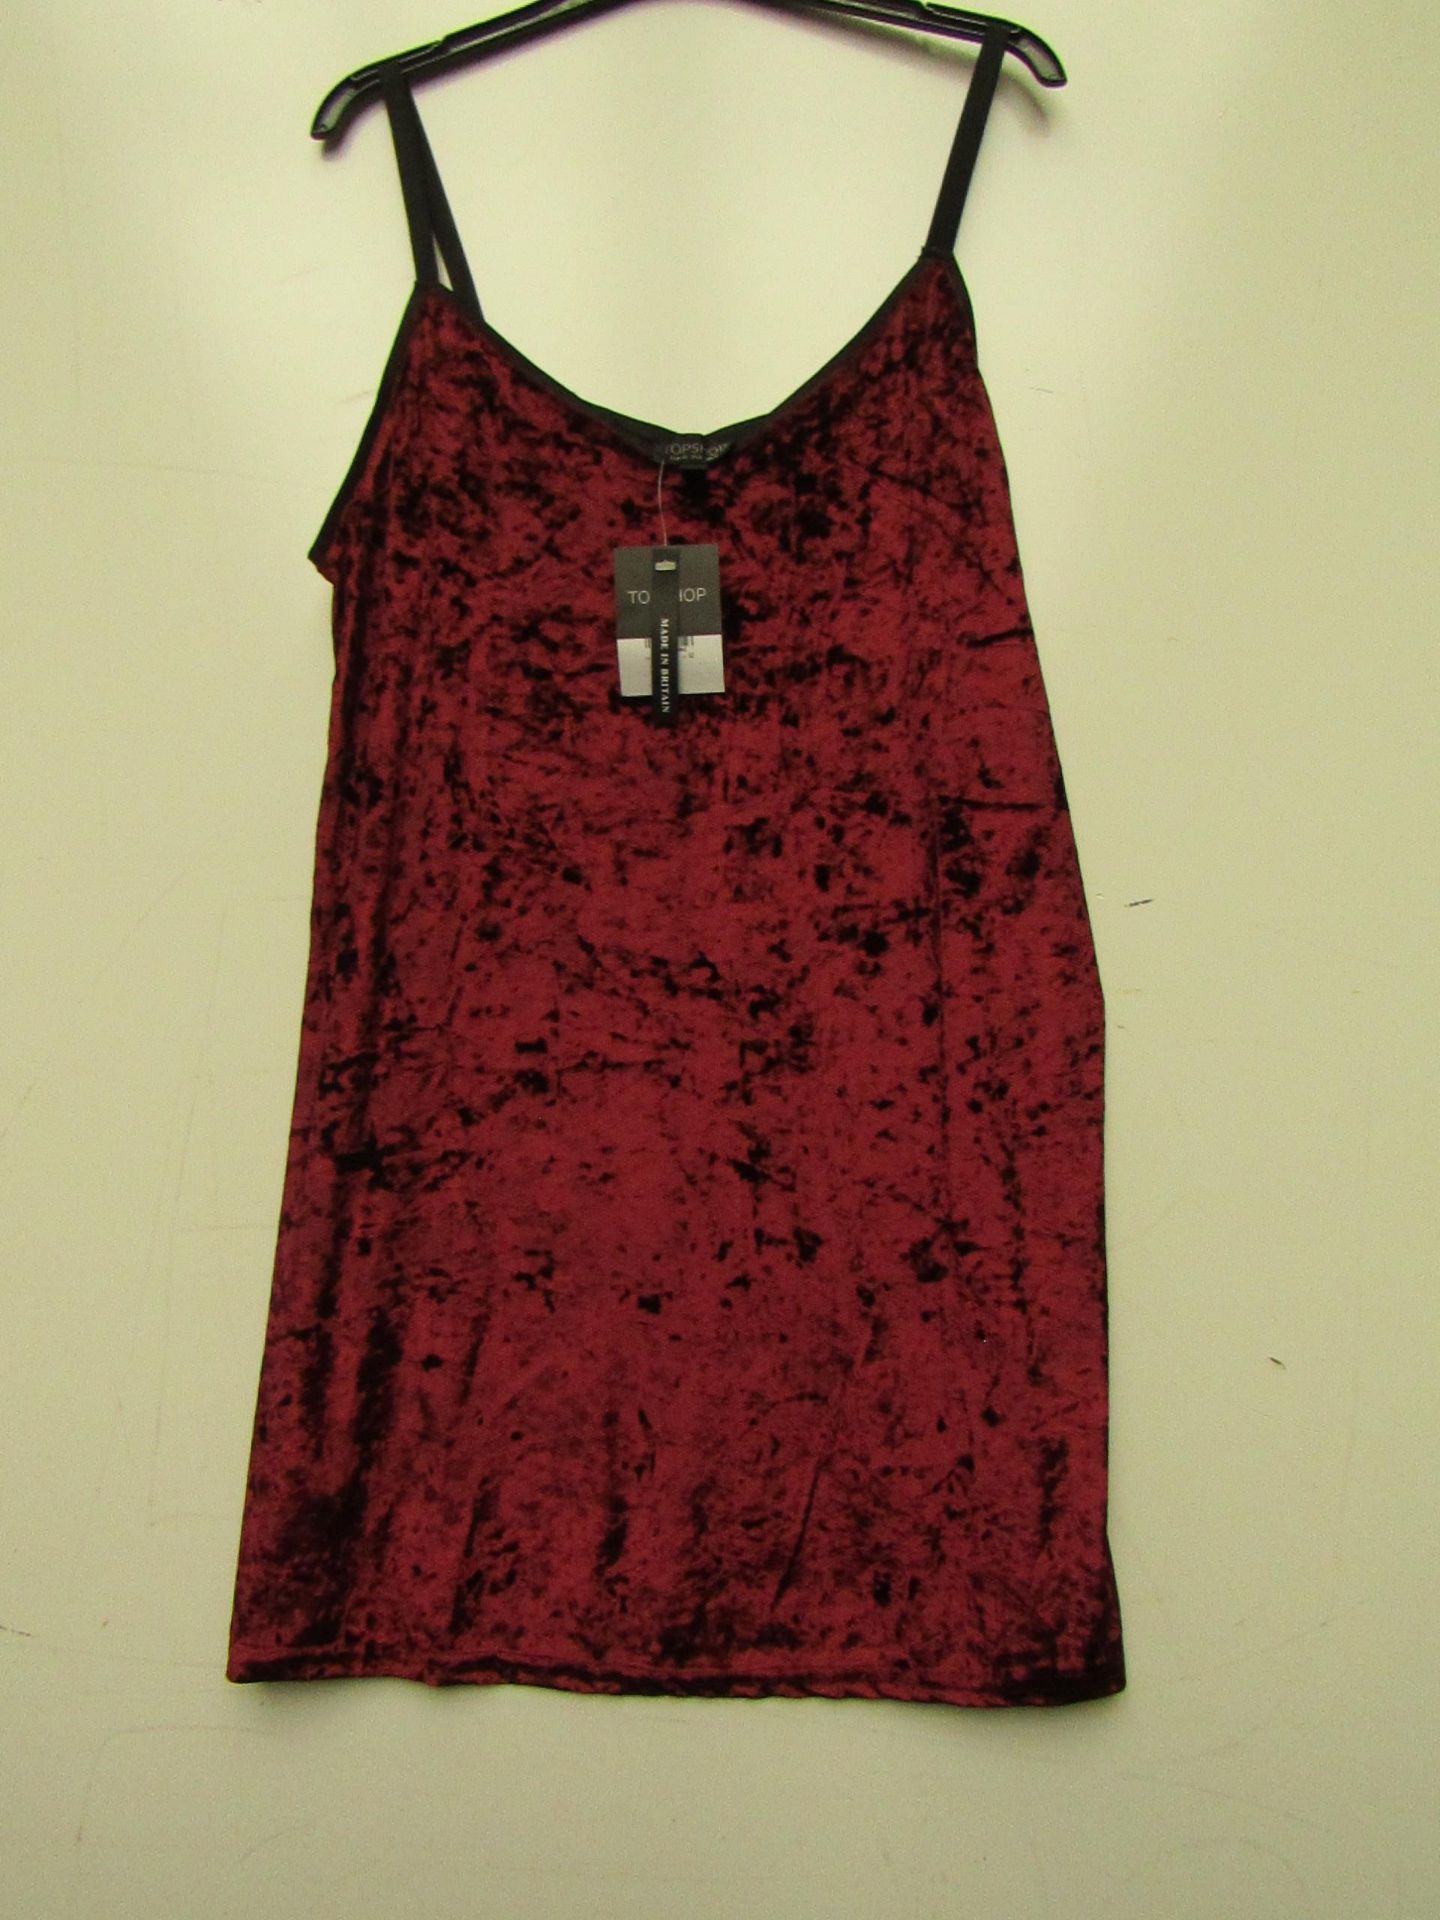 Top Shop Velvet Cami Top size 12 with tag see image